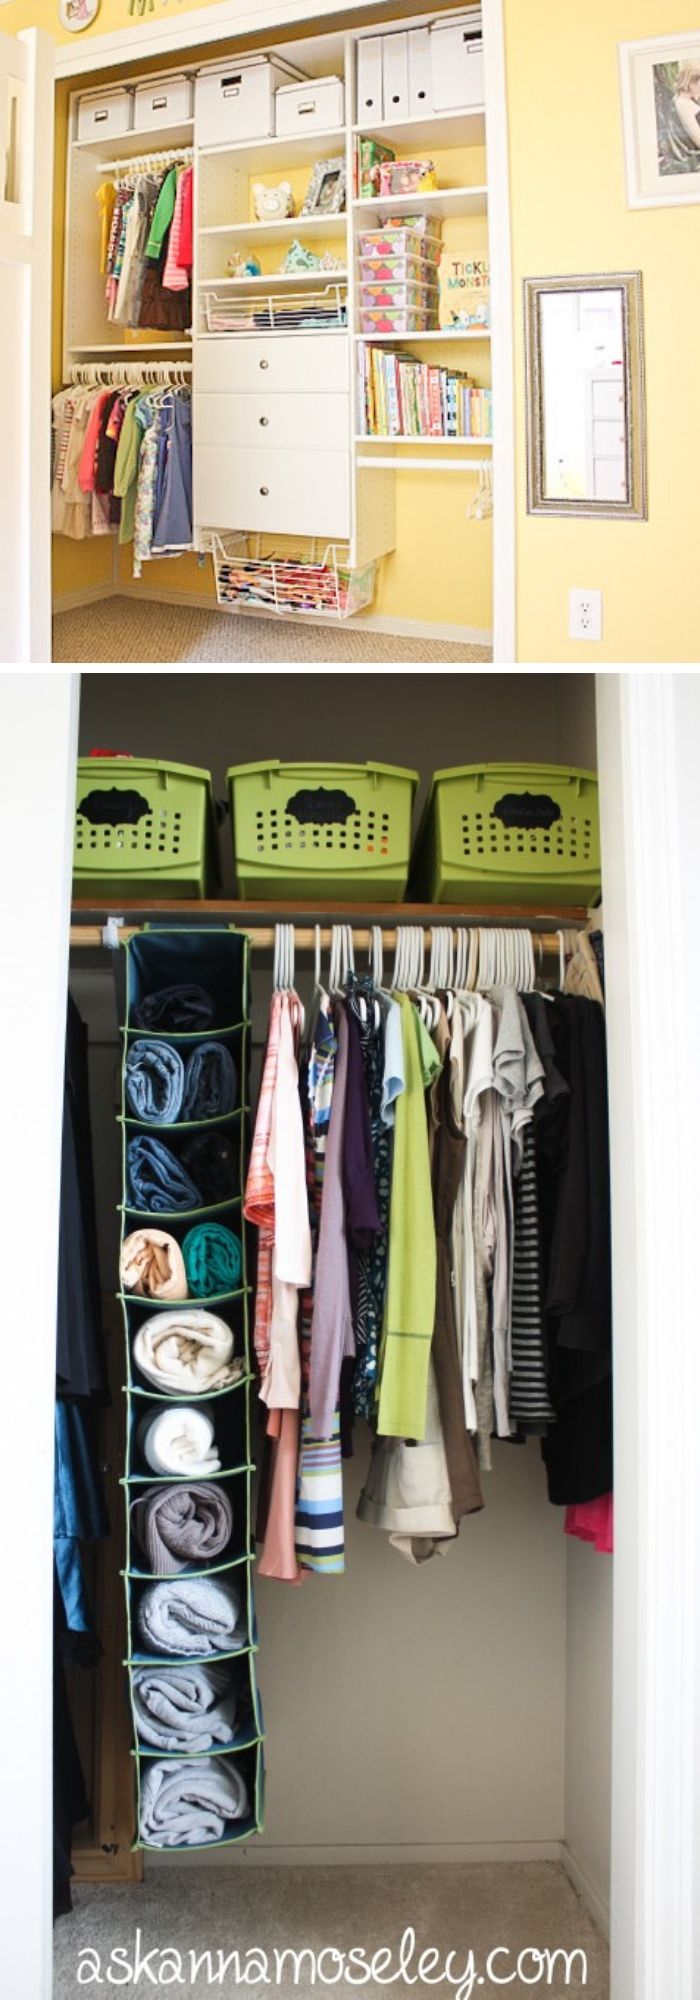 42 tips to organize home